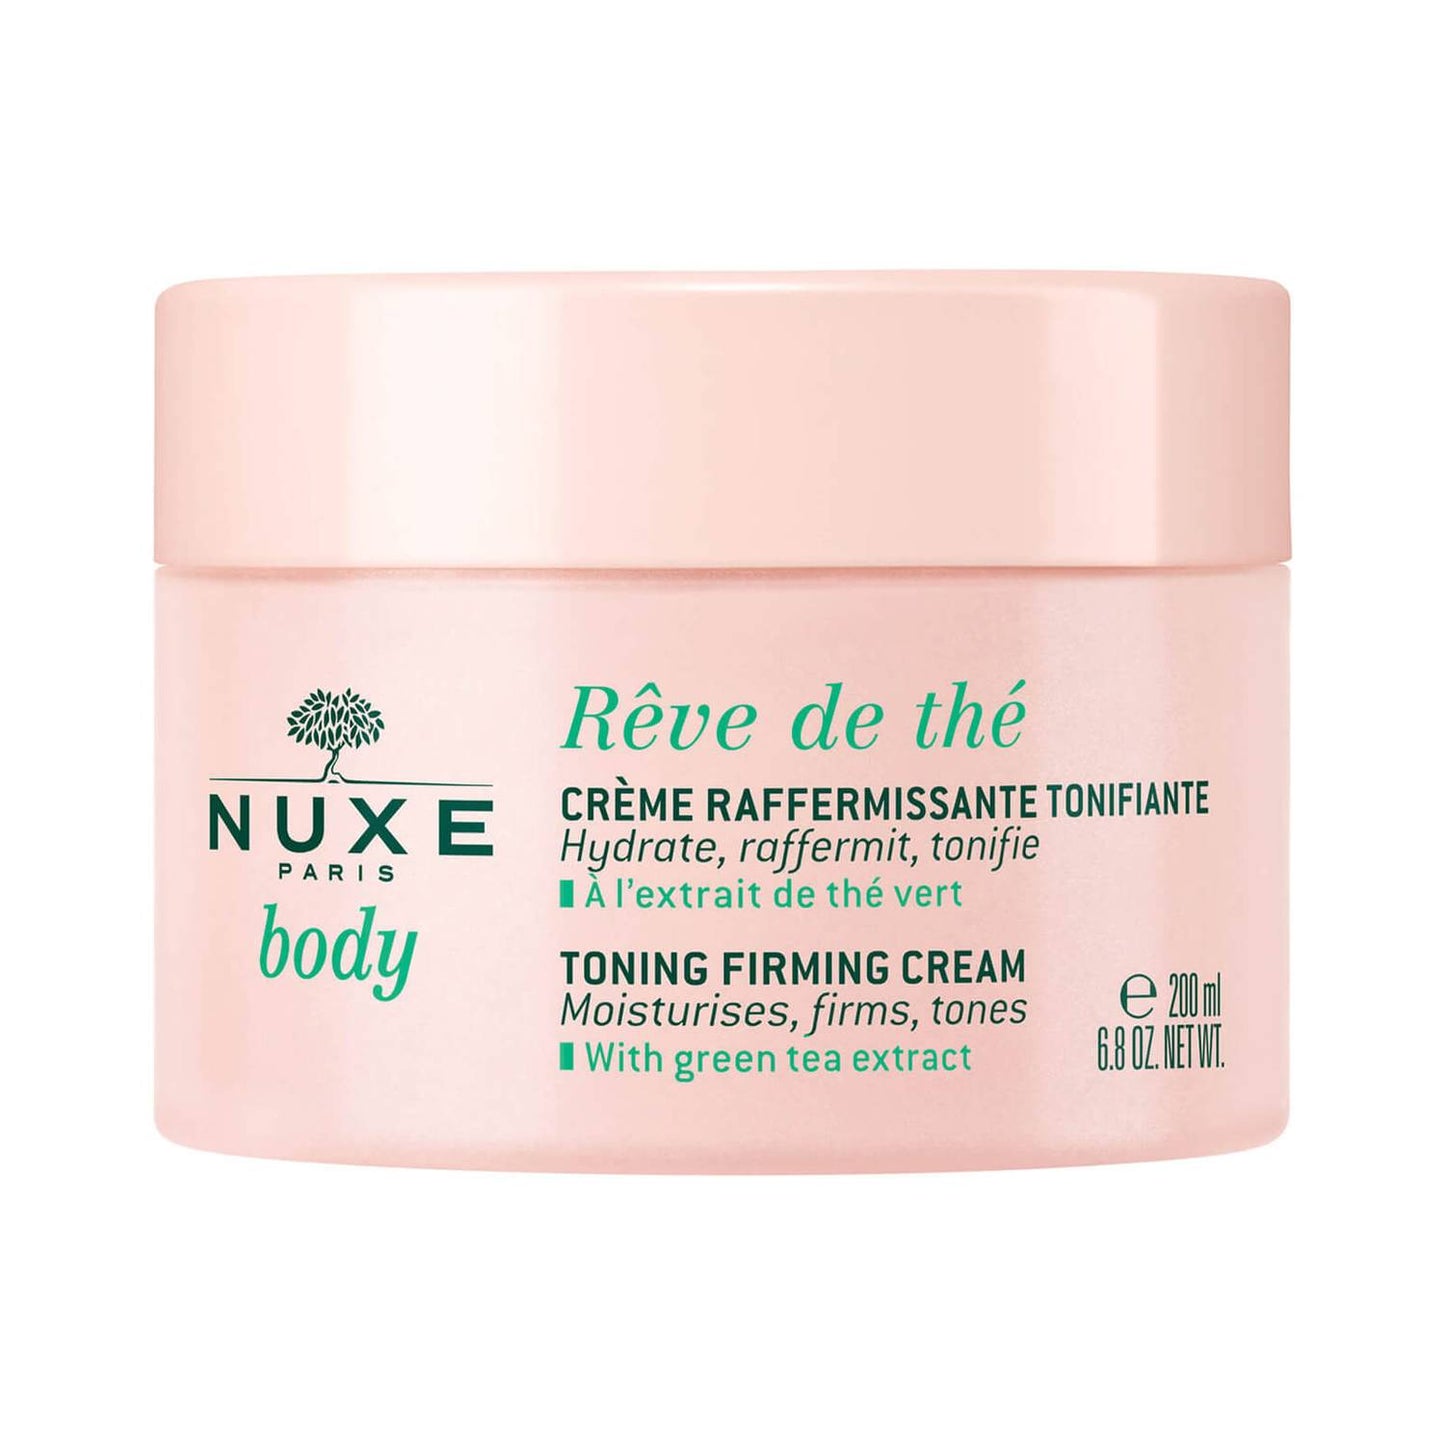 Nuxe Rêve de Thé Toning-Firming Cream smells amazing and although it is thick it absorbs quickly leaving your skin soft and firm. 